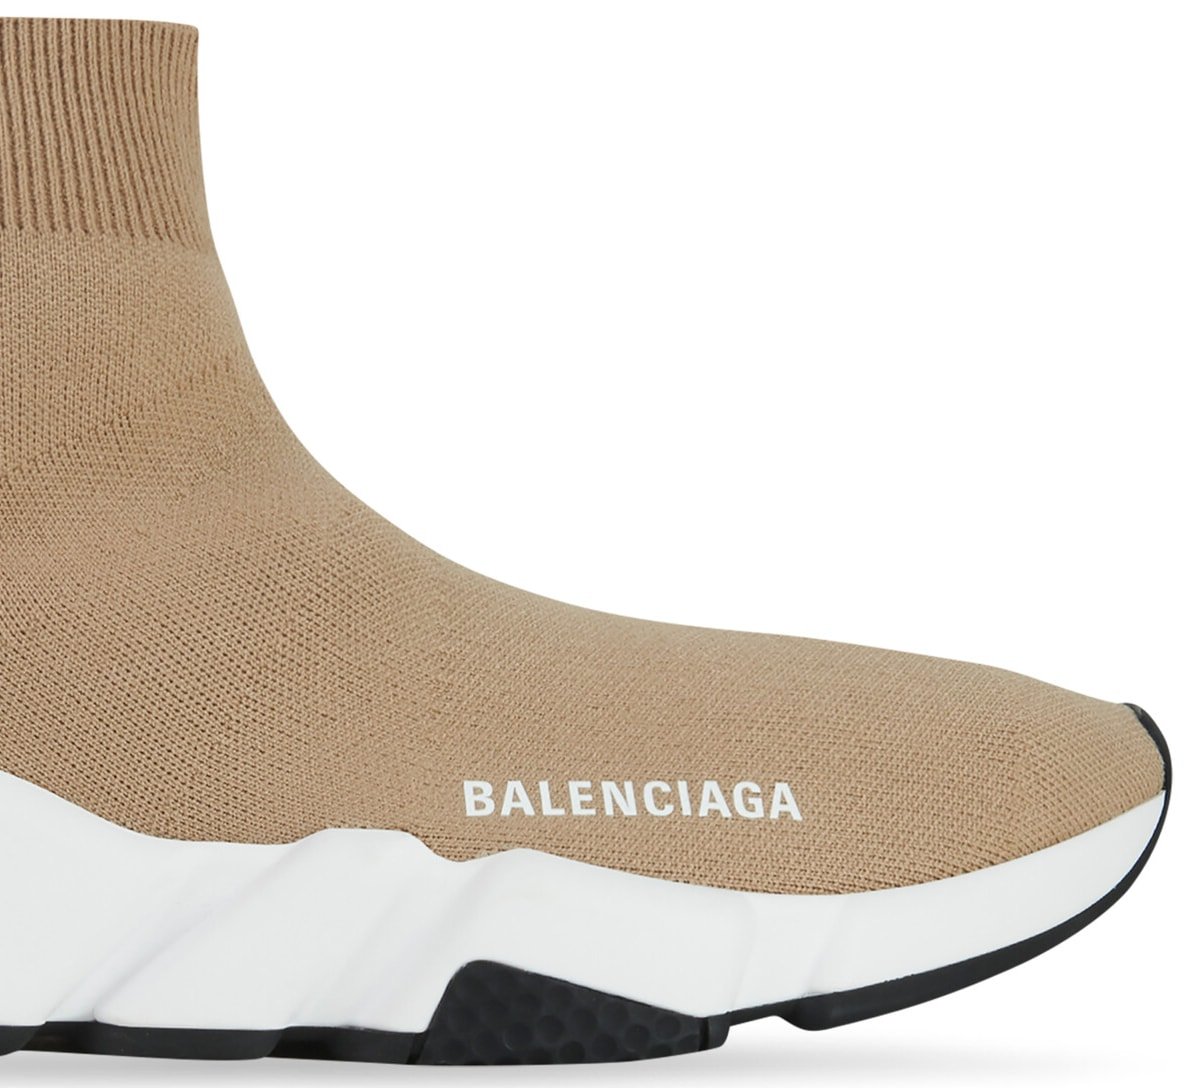 The Balenciaga logo should have neat, consistent, and properly aligned lettering